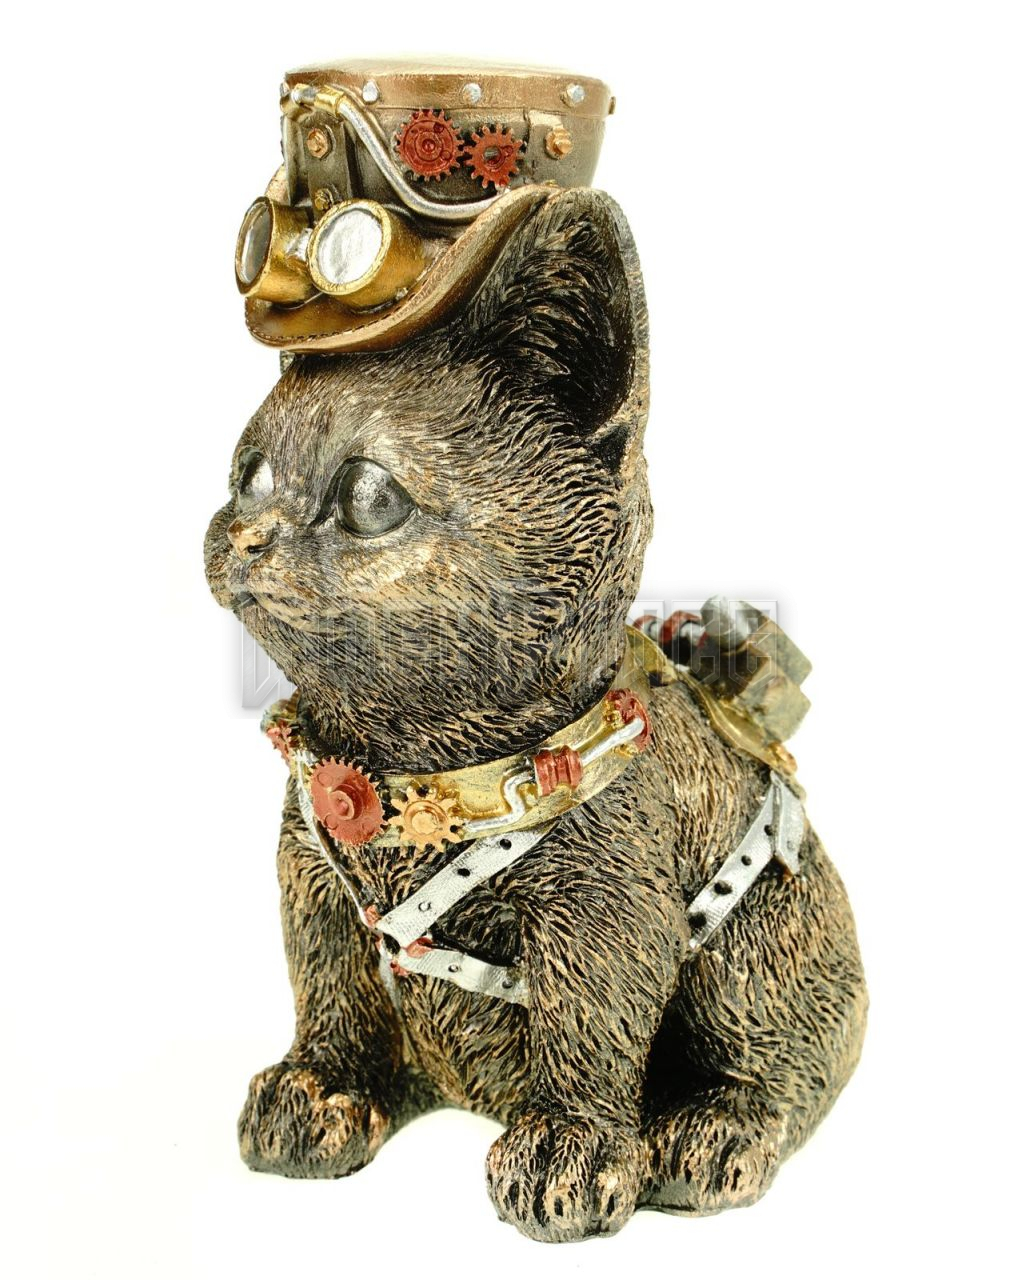 Steampunk Cat With Tophat - szobor - 839-2923